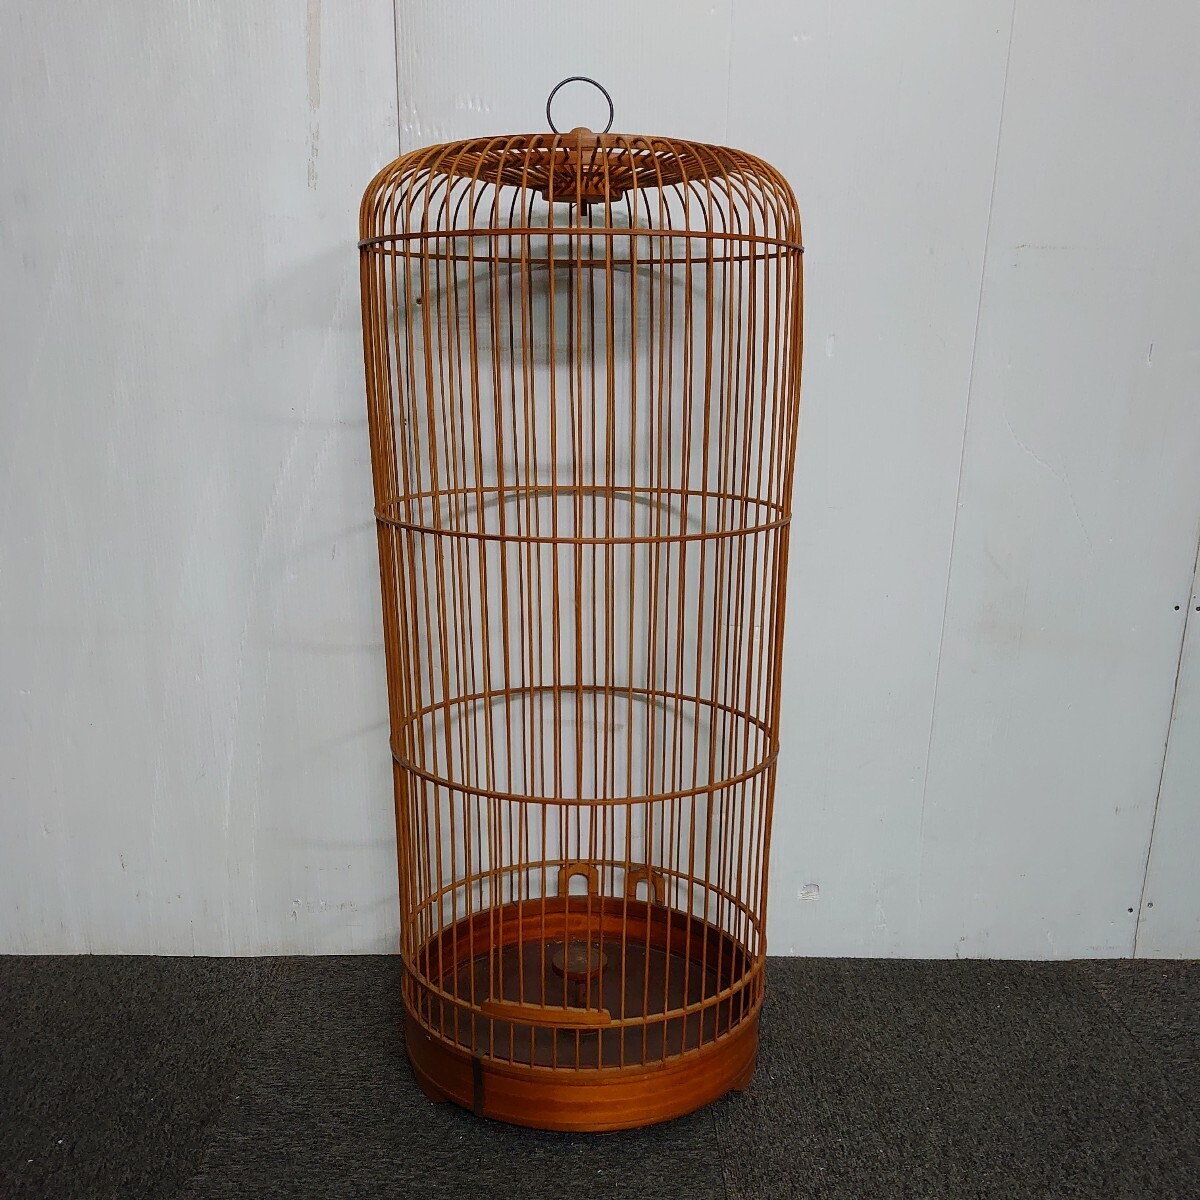  bird cage height 90cm× width 40cm bamboo skill cage bird . bamboo made pet cage antique cheap selling out start k